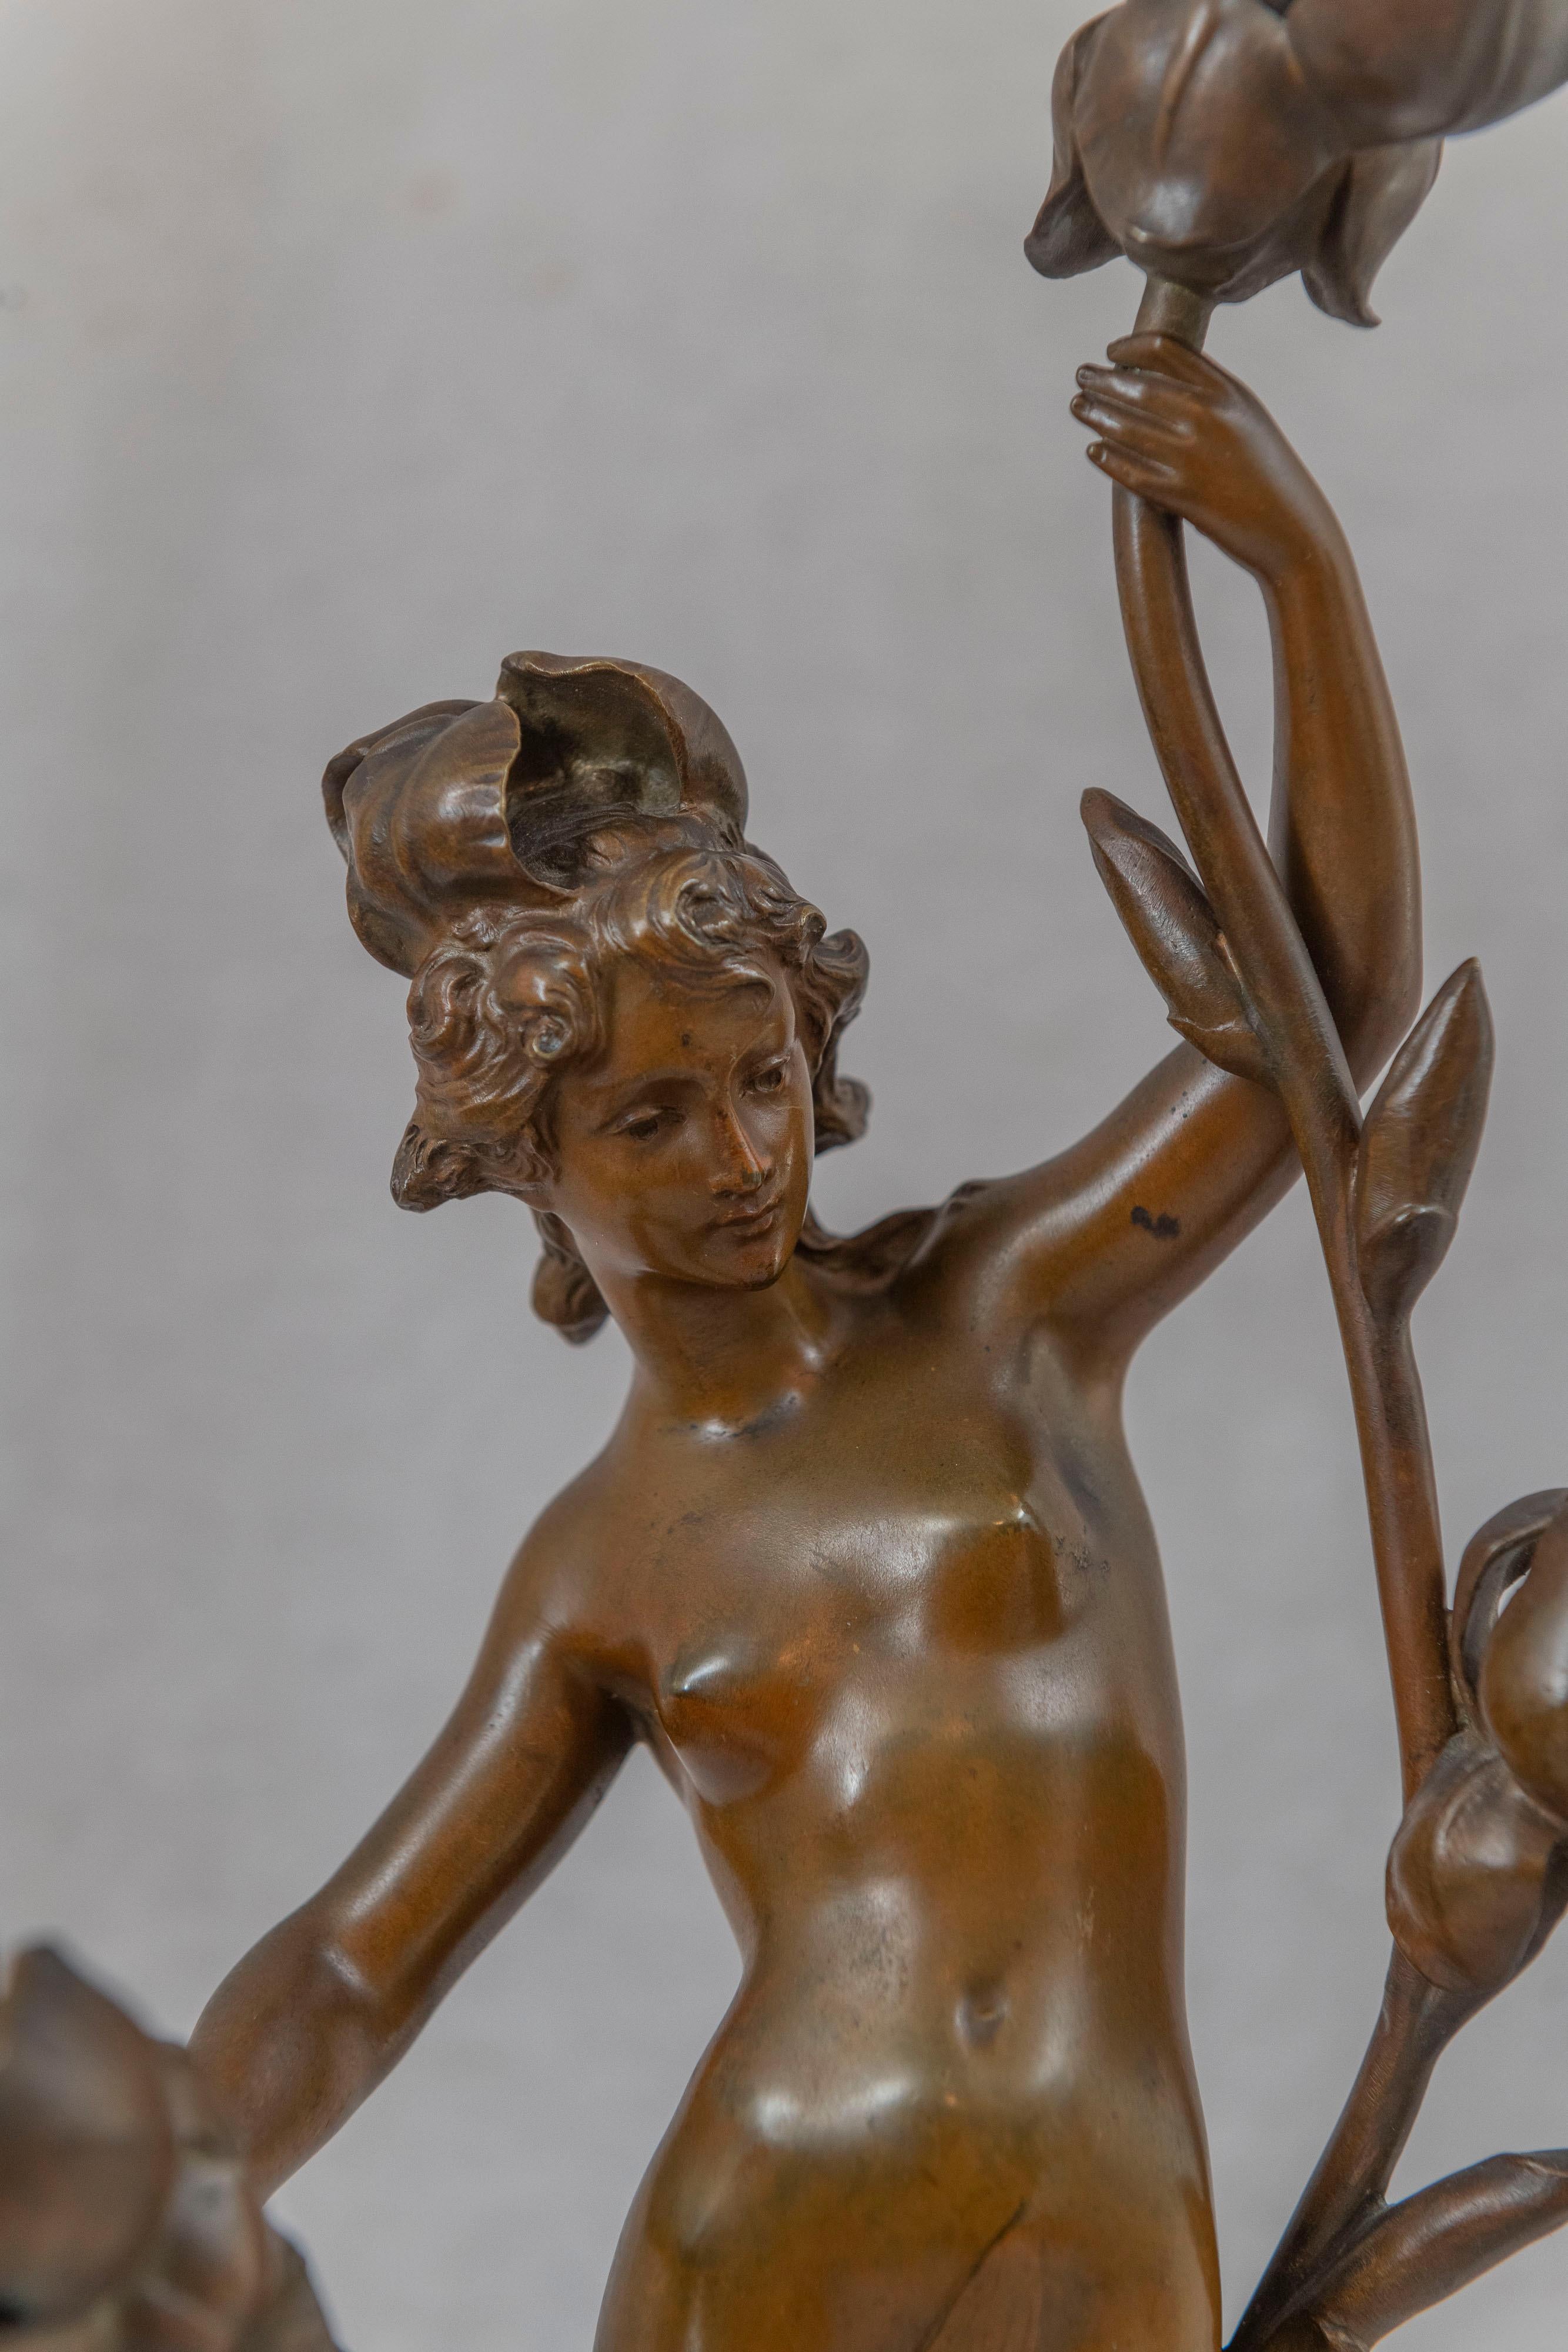 Antique Art Nouveau Lamp w/Partially Nude Woman, Jean-Baptiste Germain, French In Good Condition For Sale In Petaluma, CA